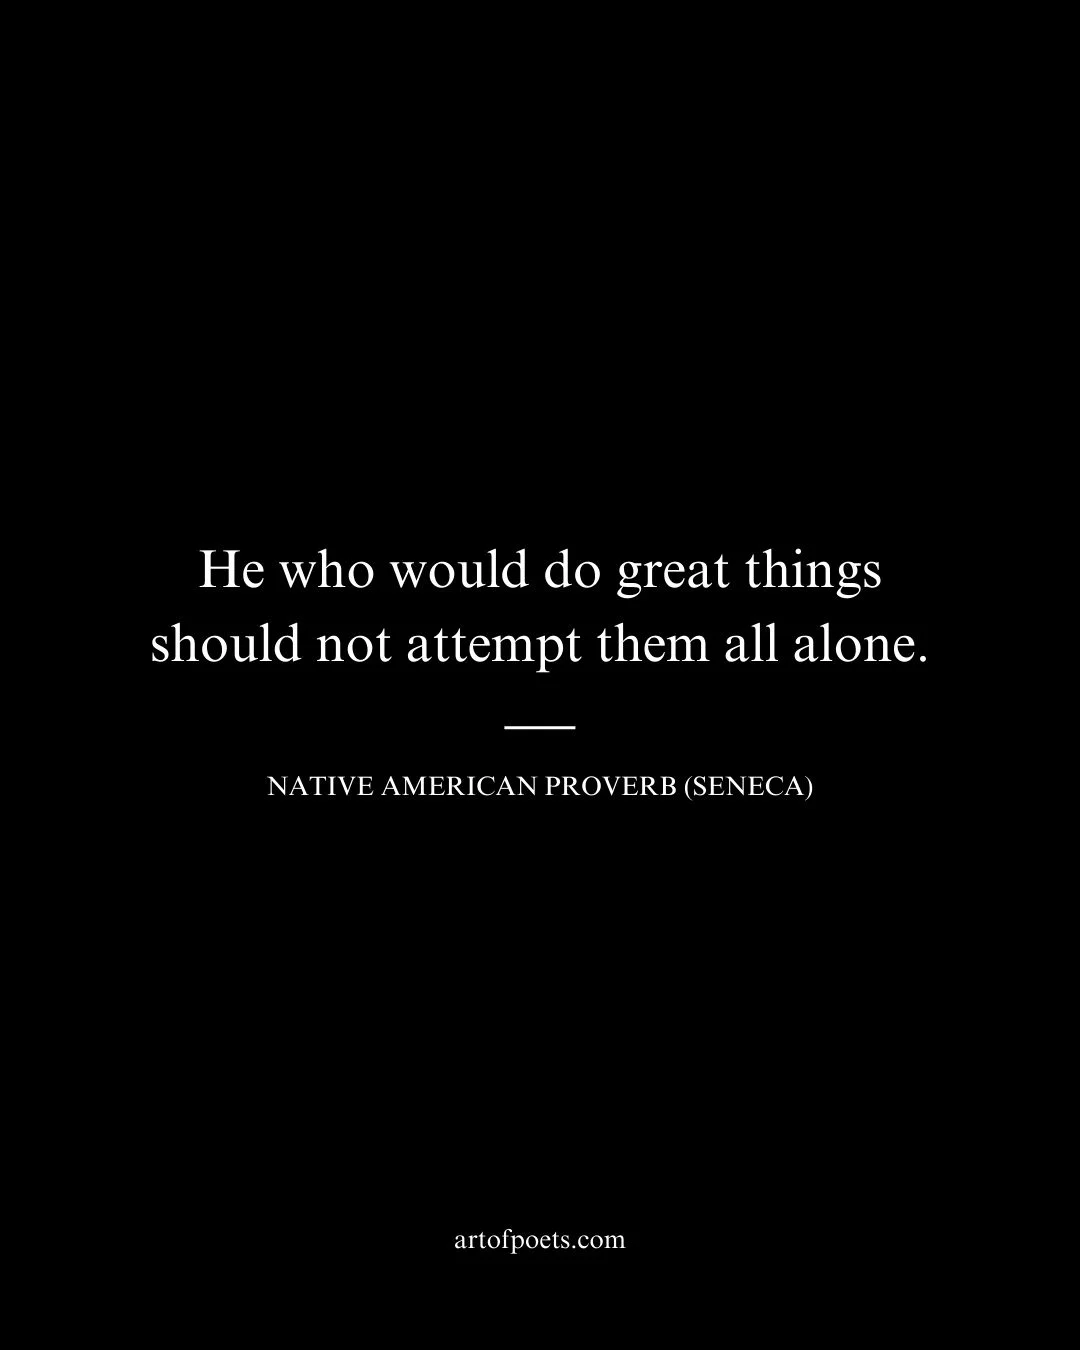 He who would do great things should not attempt them all alone